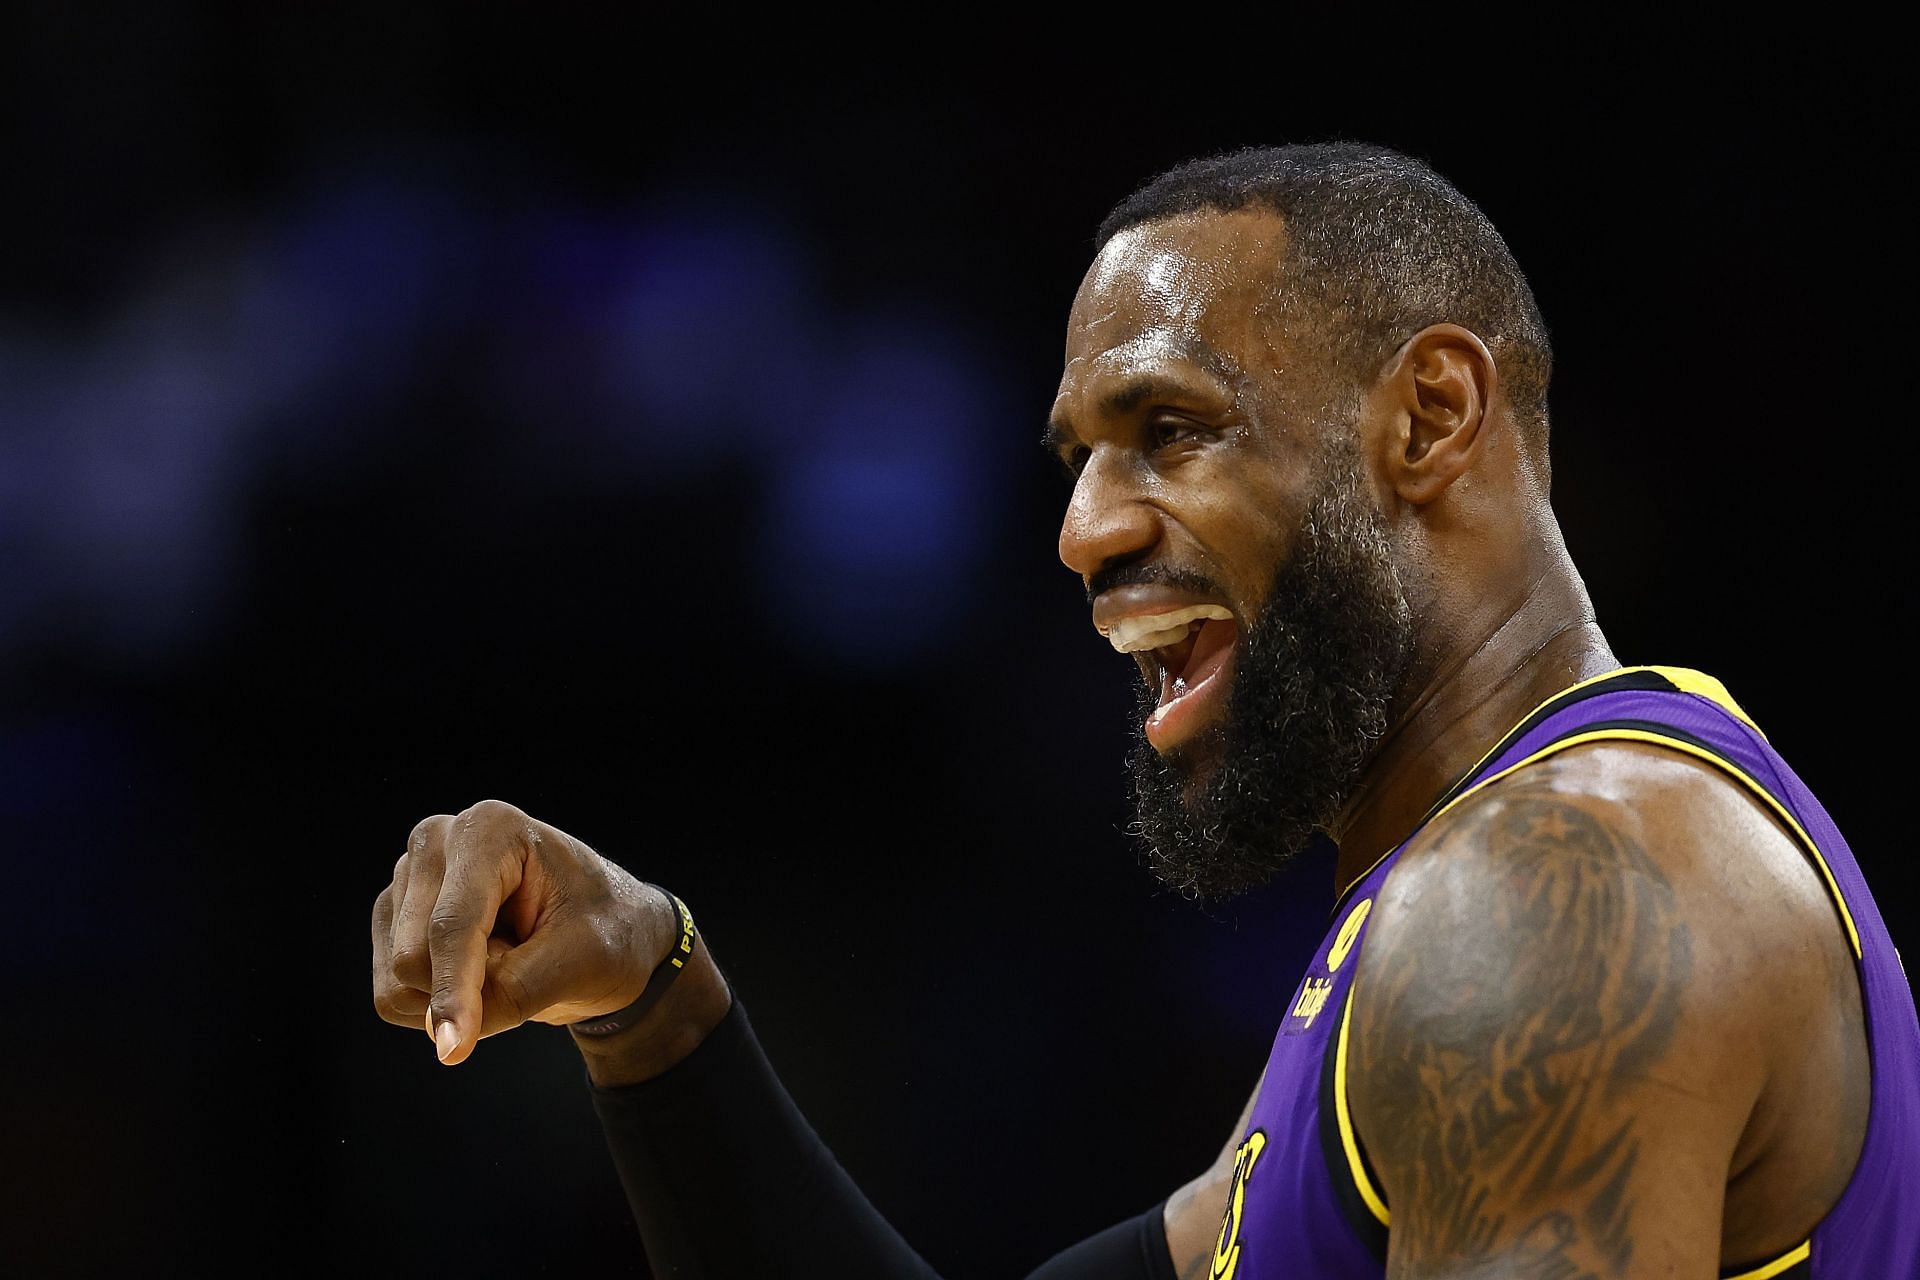 LeBron James promoted the Super Bowl through DraftKings.